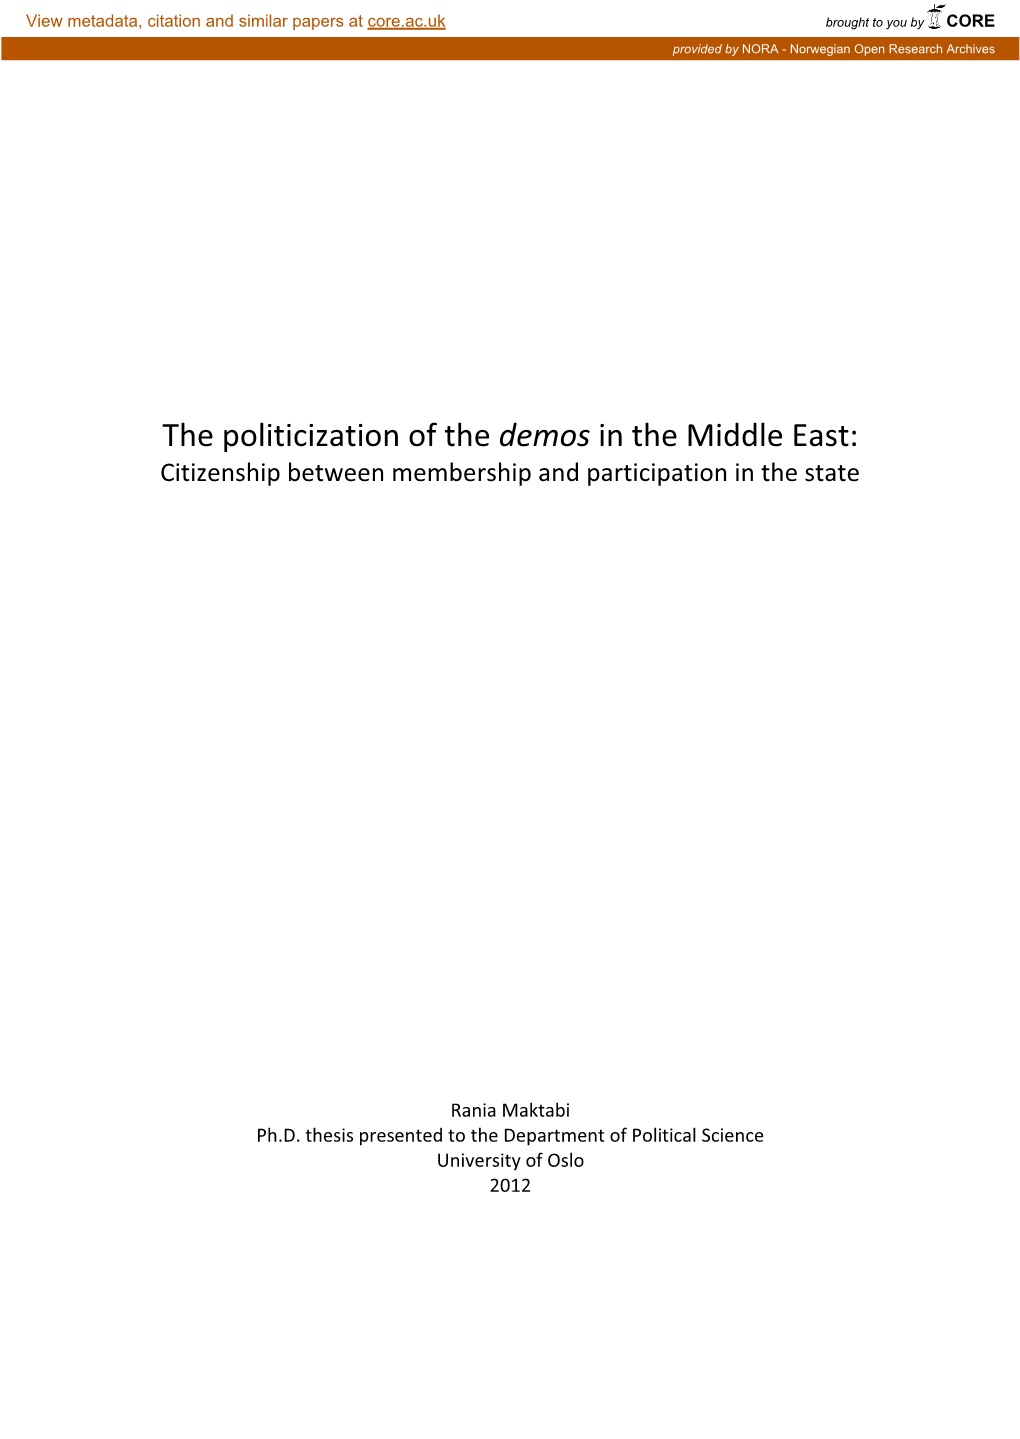 The Politicization of the Demos in the Middle East: Citizenship Between Membership and Participation in the State